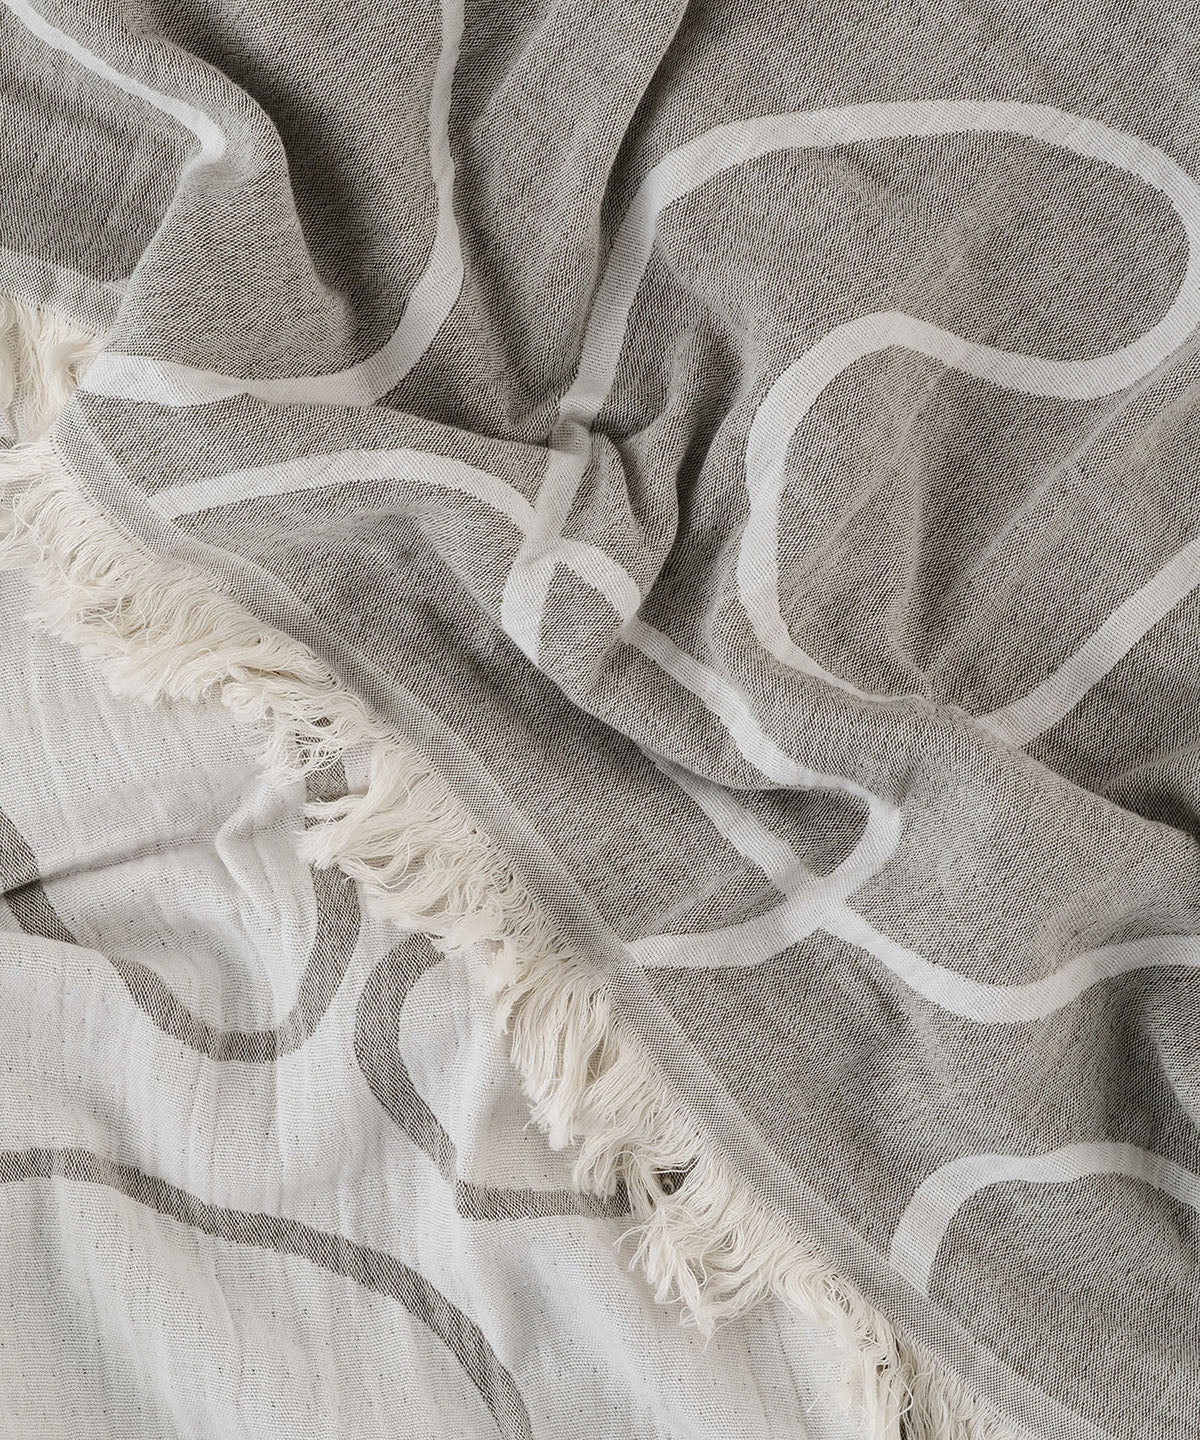 Patterned olive white recycled cotton throw blanket detail